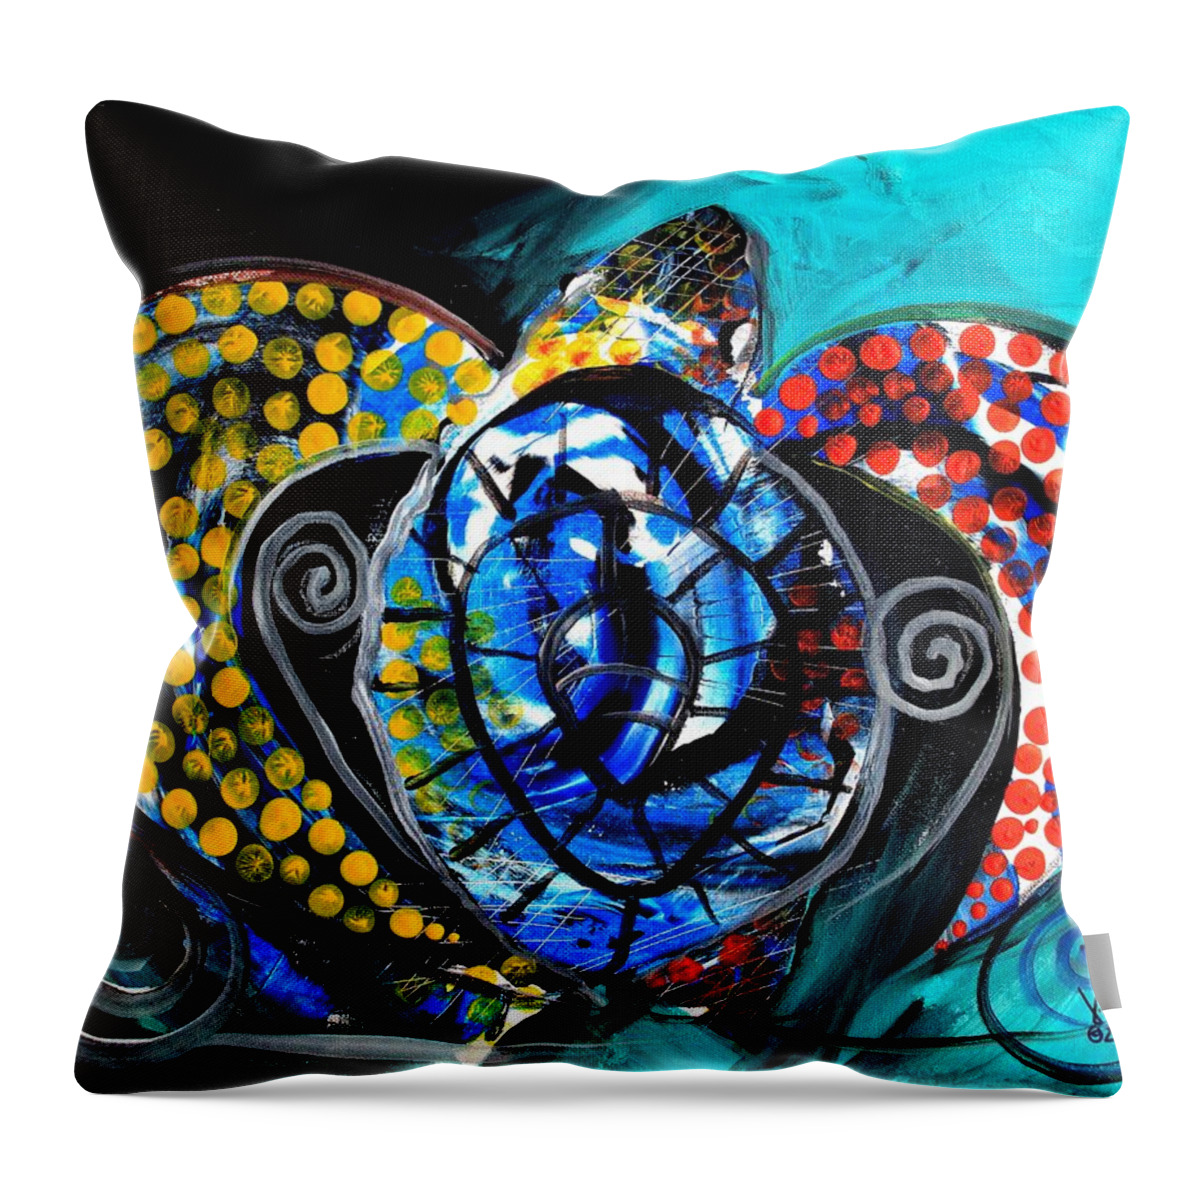 Sea Throw Pillow featuring the painting Deep Sea, Sea Turtle by J Vincent Scarpace